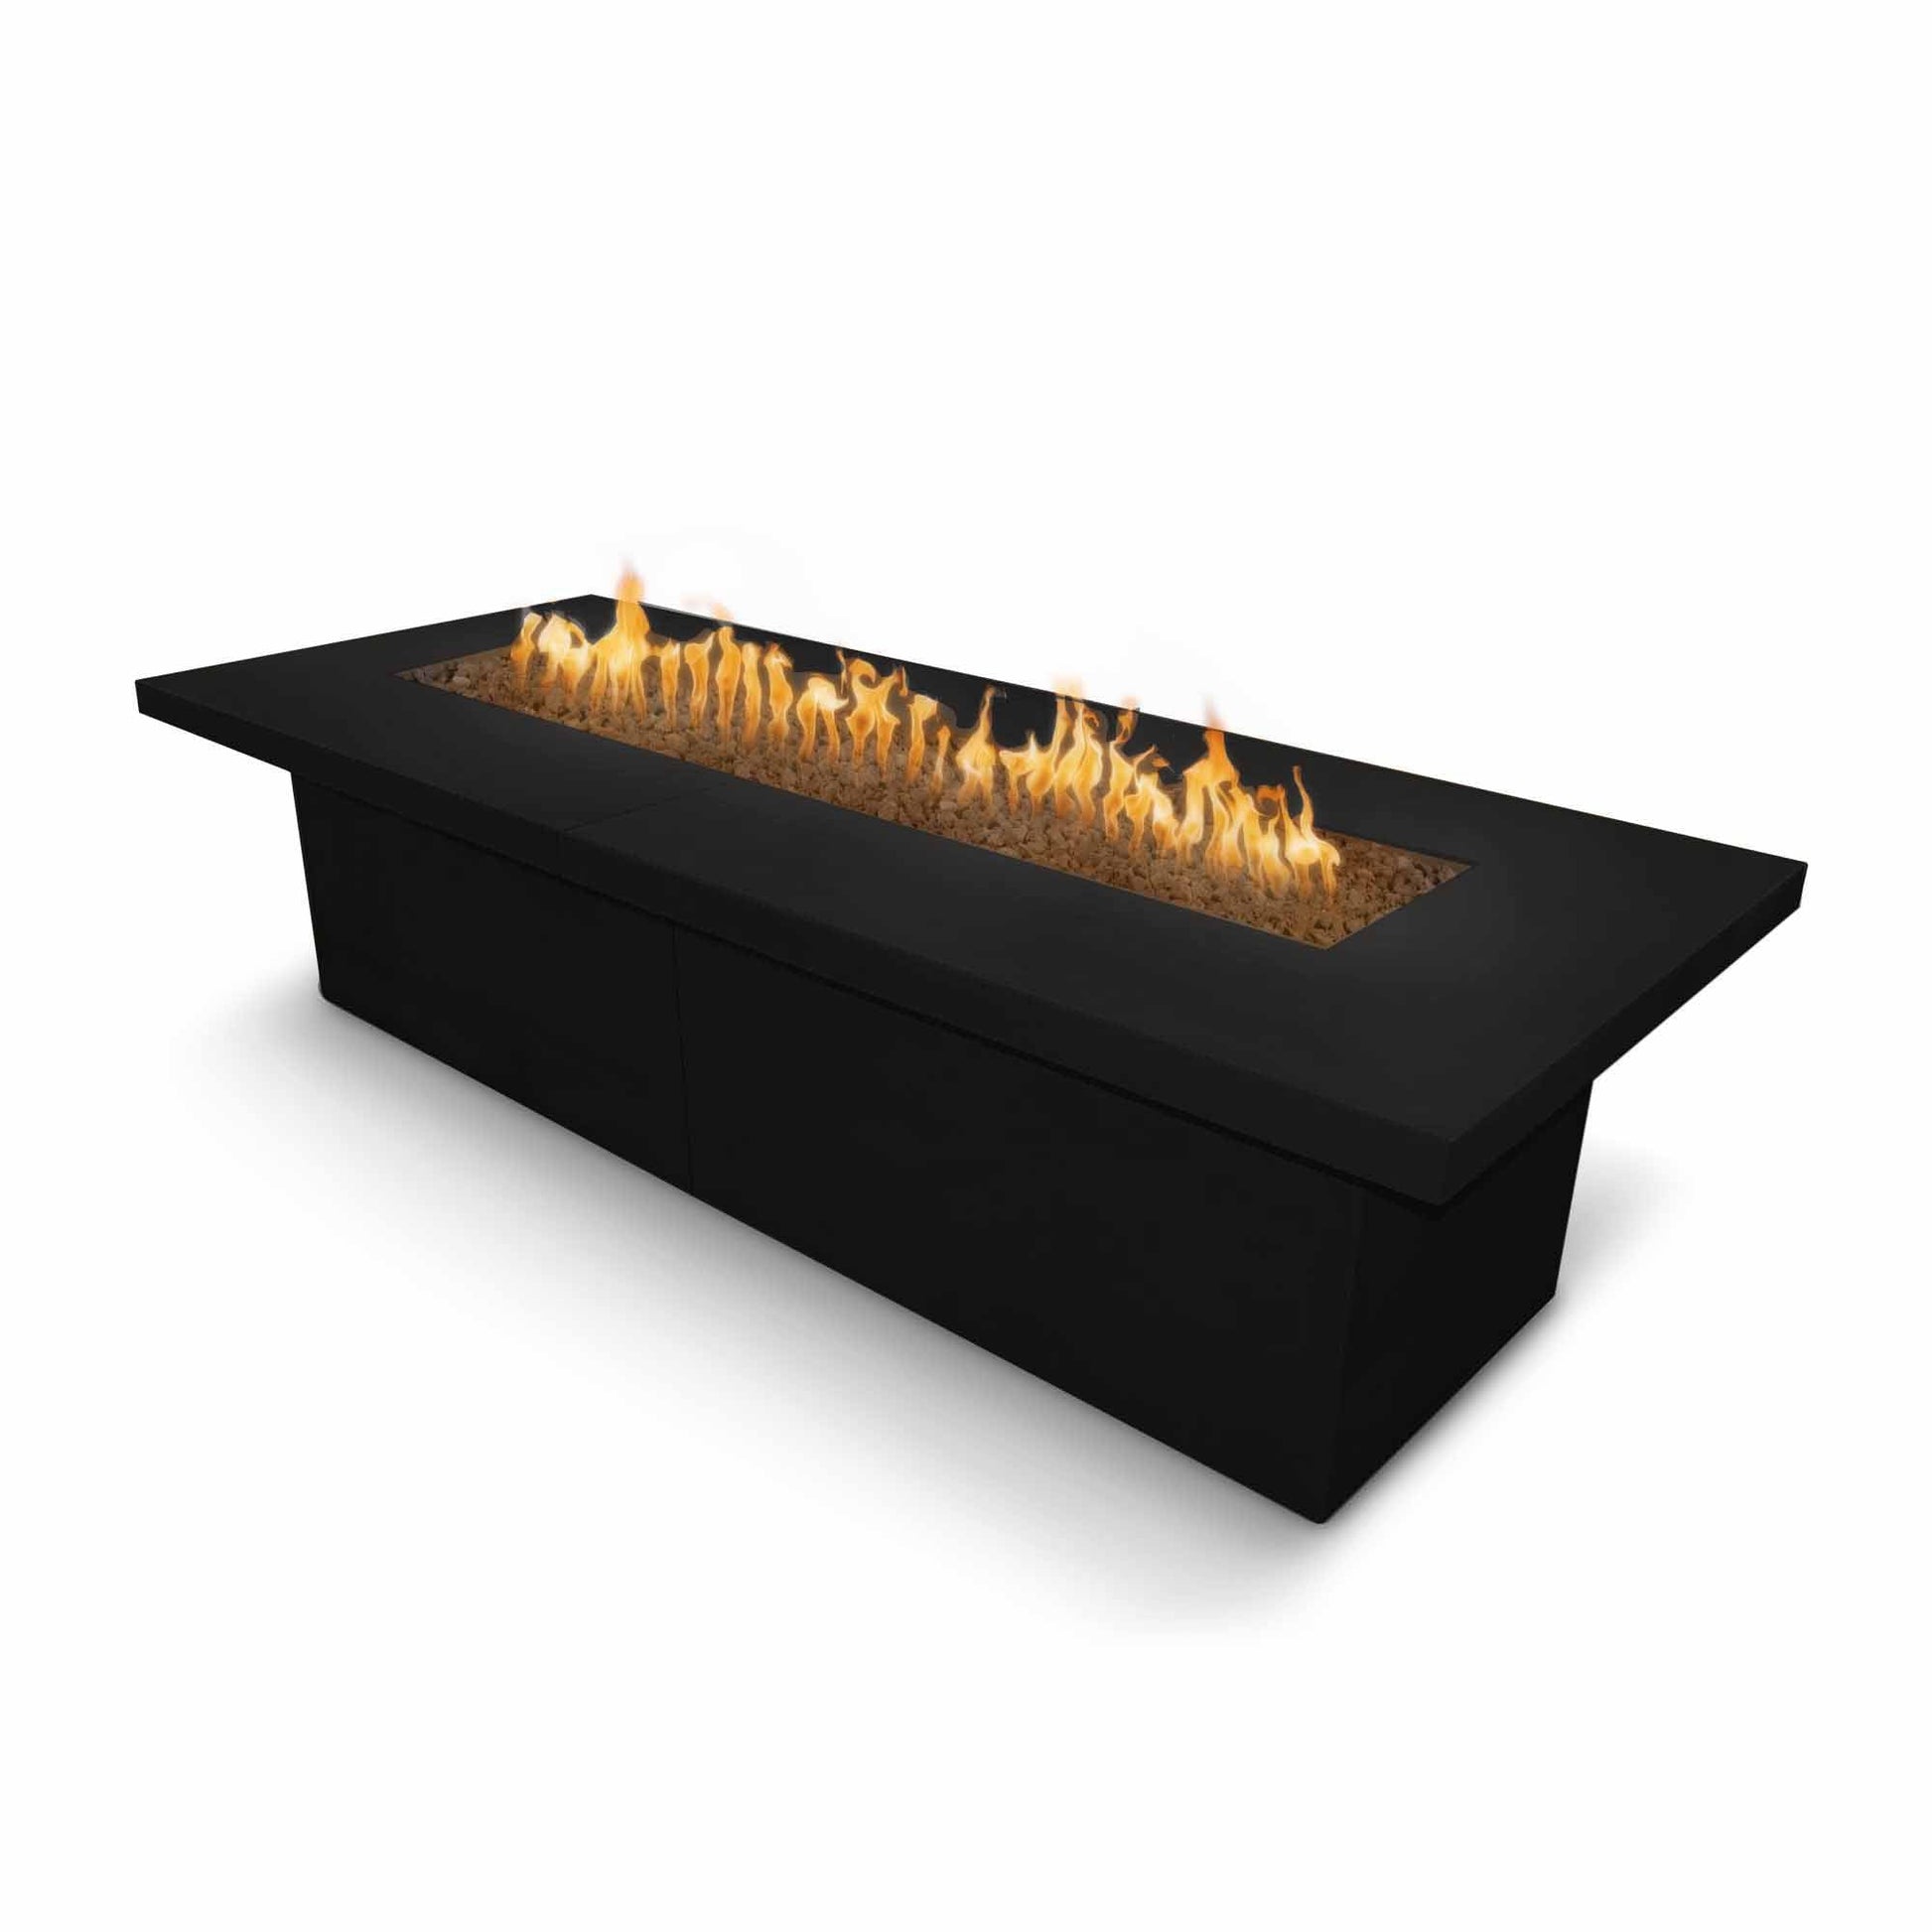 The Outdoor Plus Rectangular Newport 144" Copper Vein Powder Coated Metal Liquid Propane Fire Pit with 110V Electronic Ignition